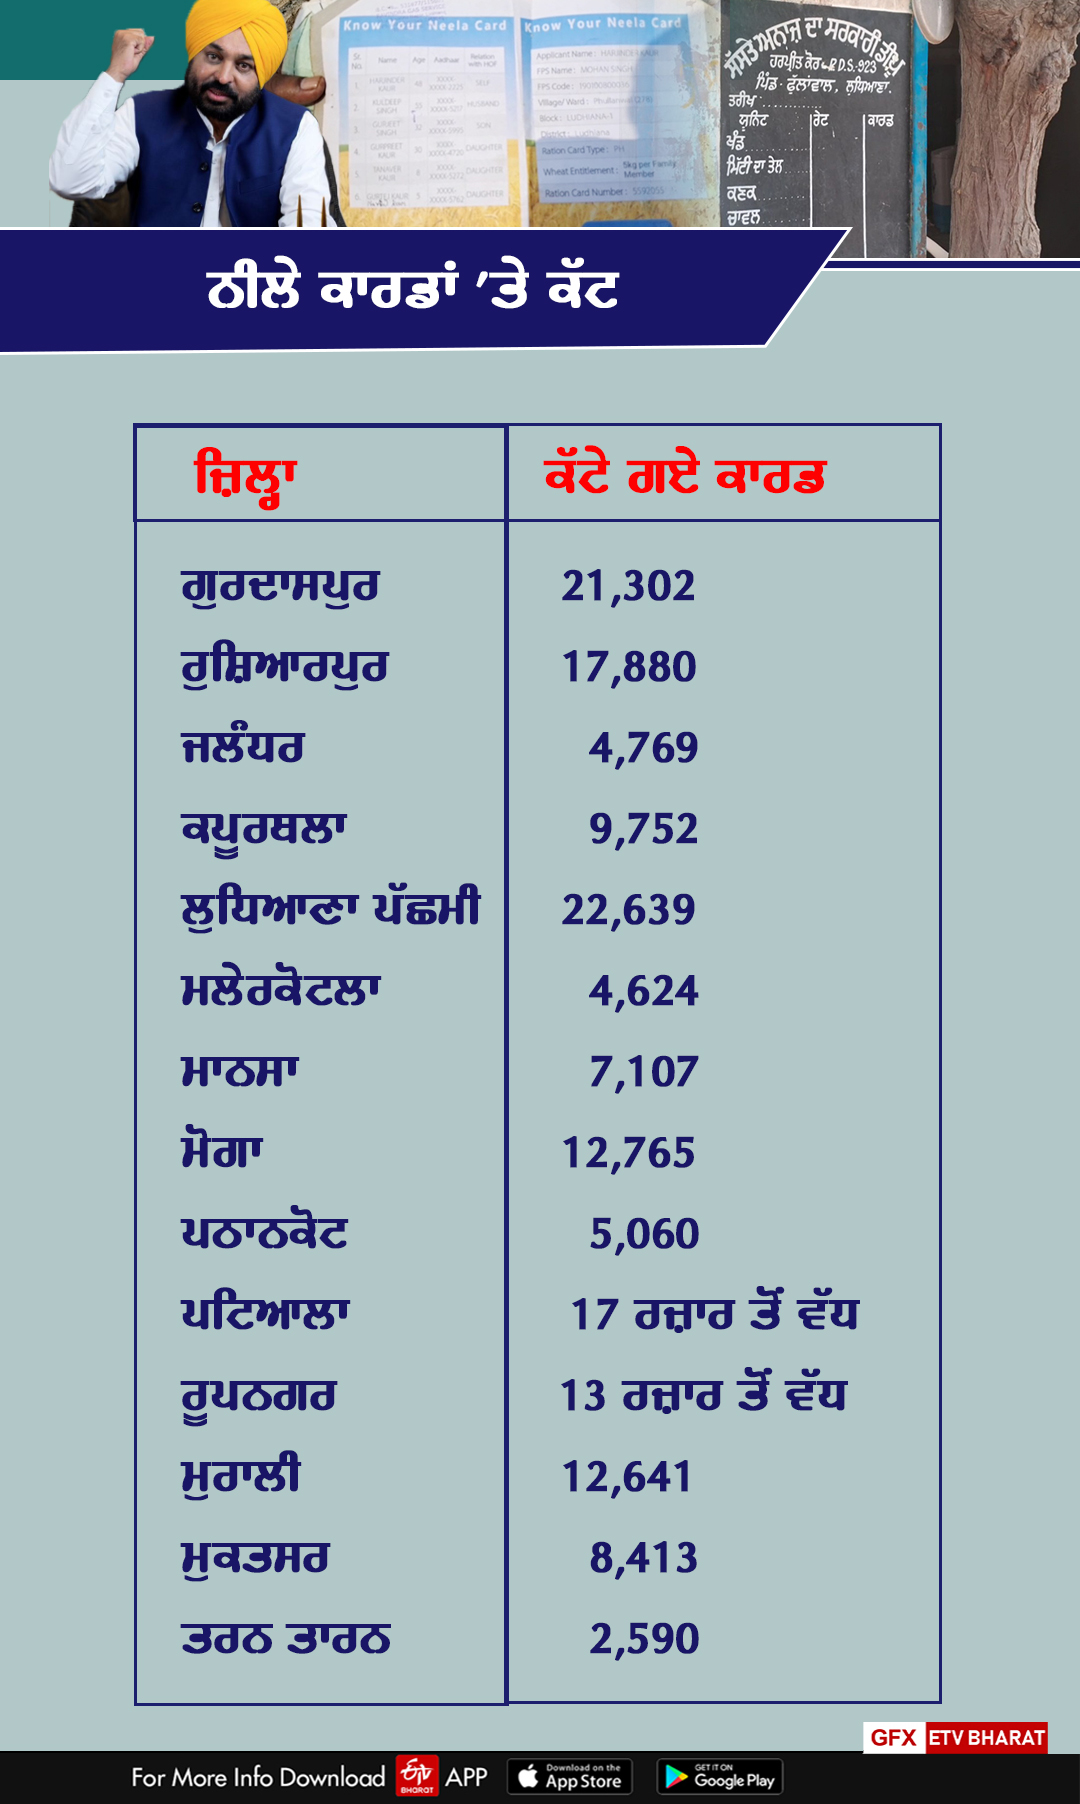 Reduction in Neela Card and Ration cards, Ludhiana